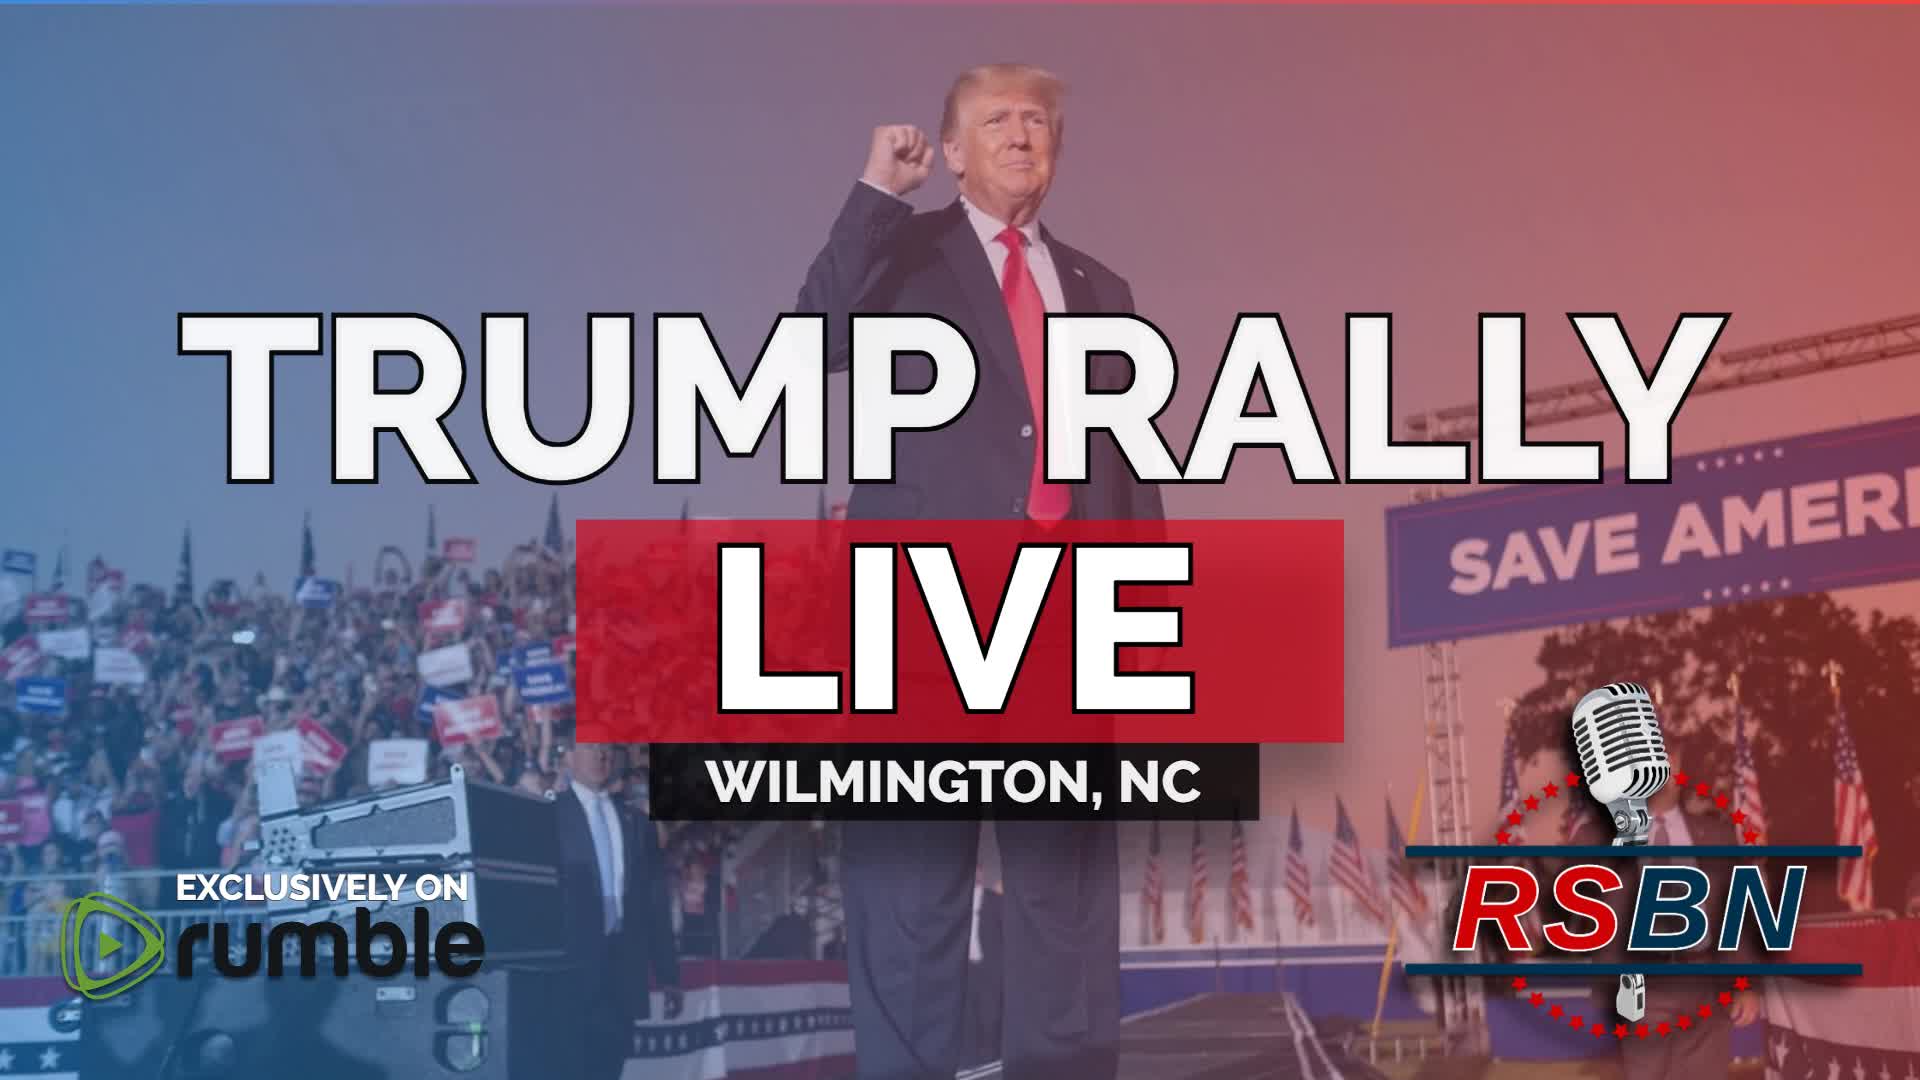 ?PRESIDENT DONALD TRUMP RALLY LIVE IN WILMINGTON, NC 9/23/22